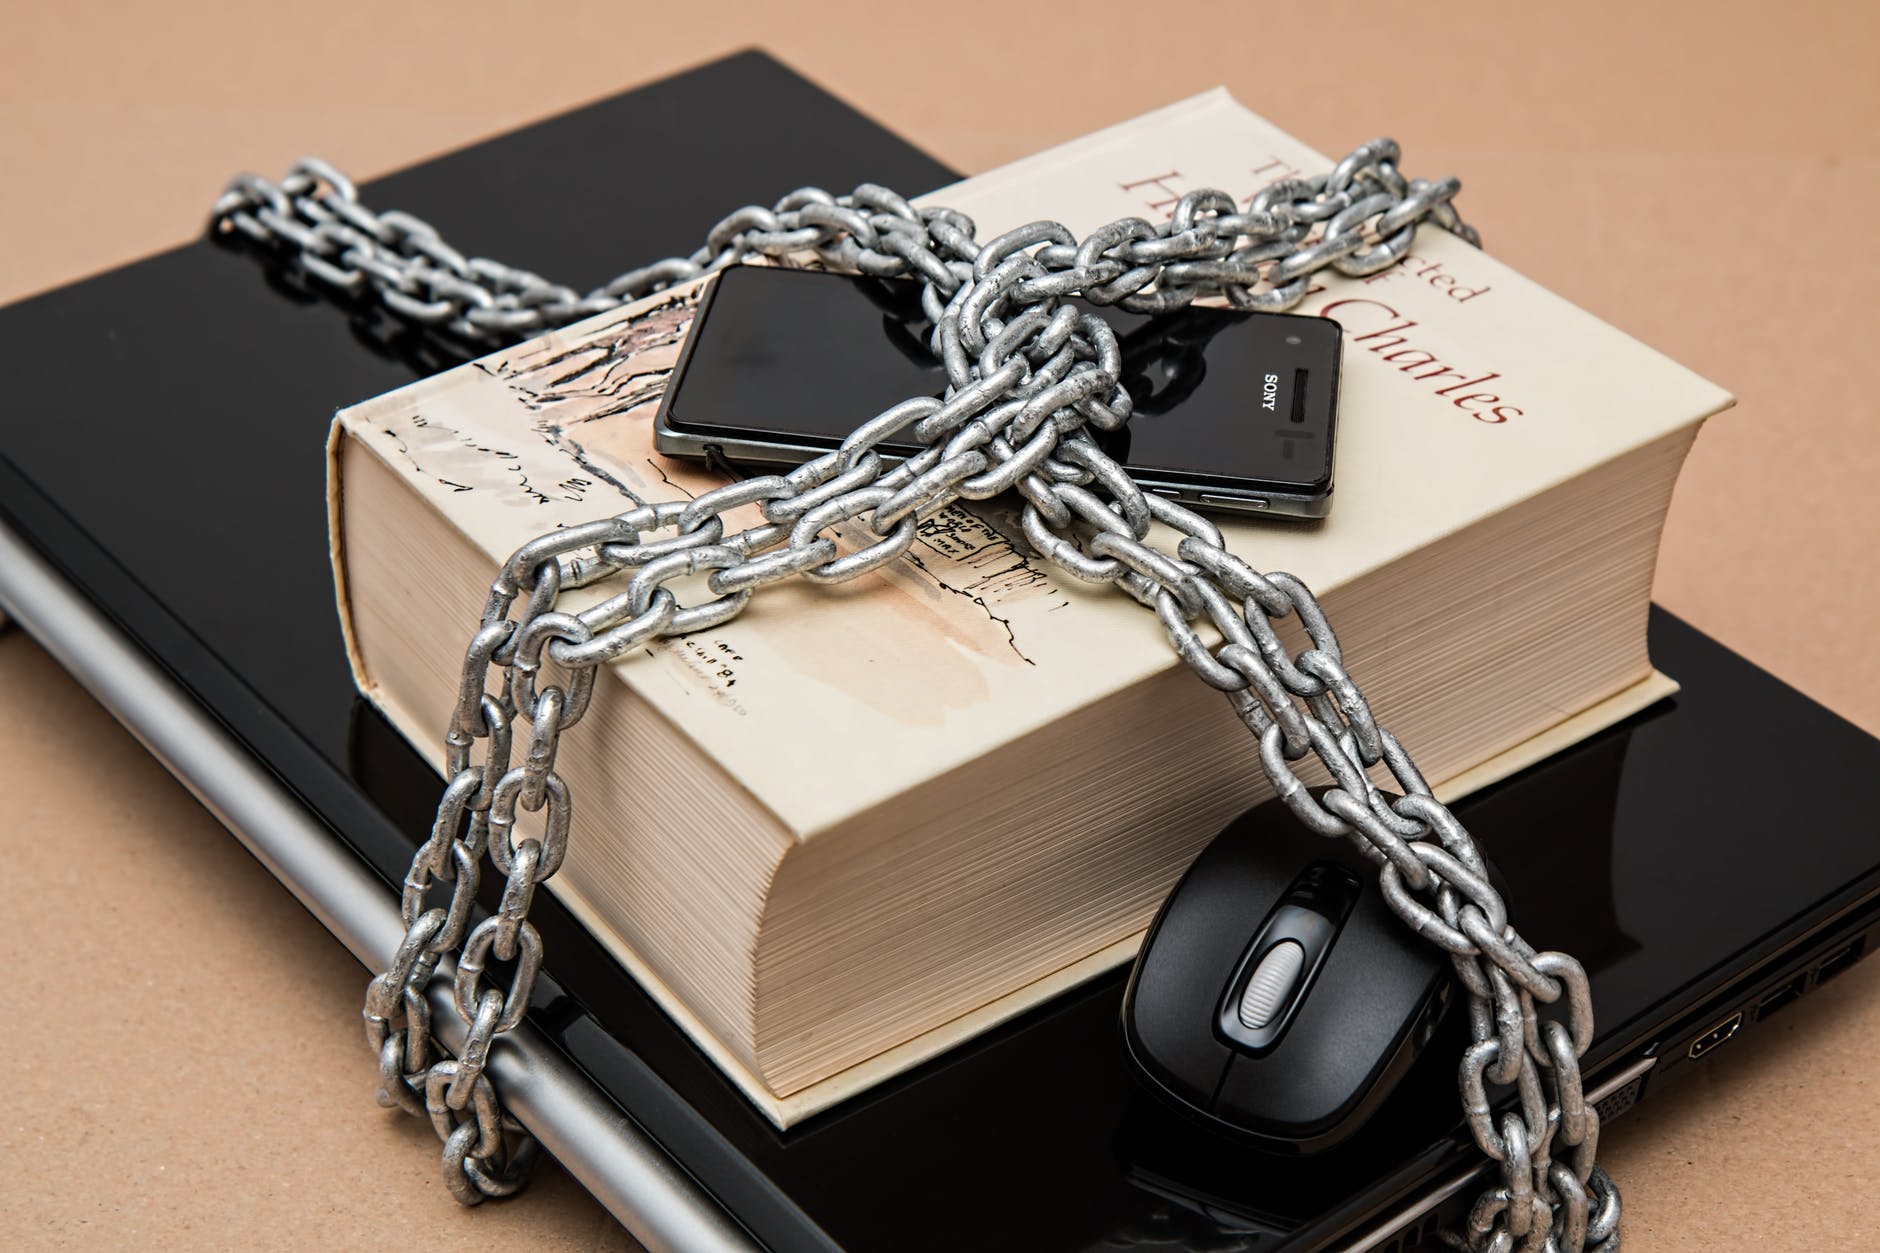 Laptop, book, mouse and phone wrapped in chain